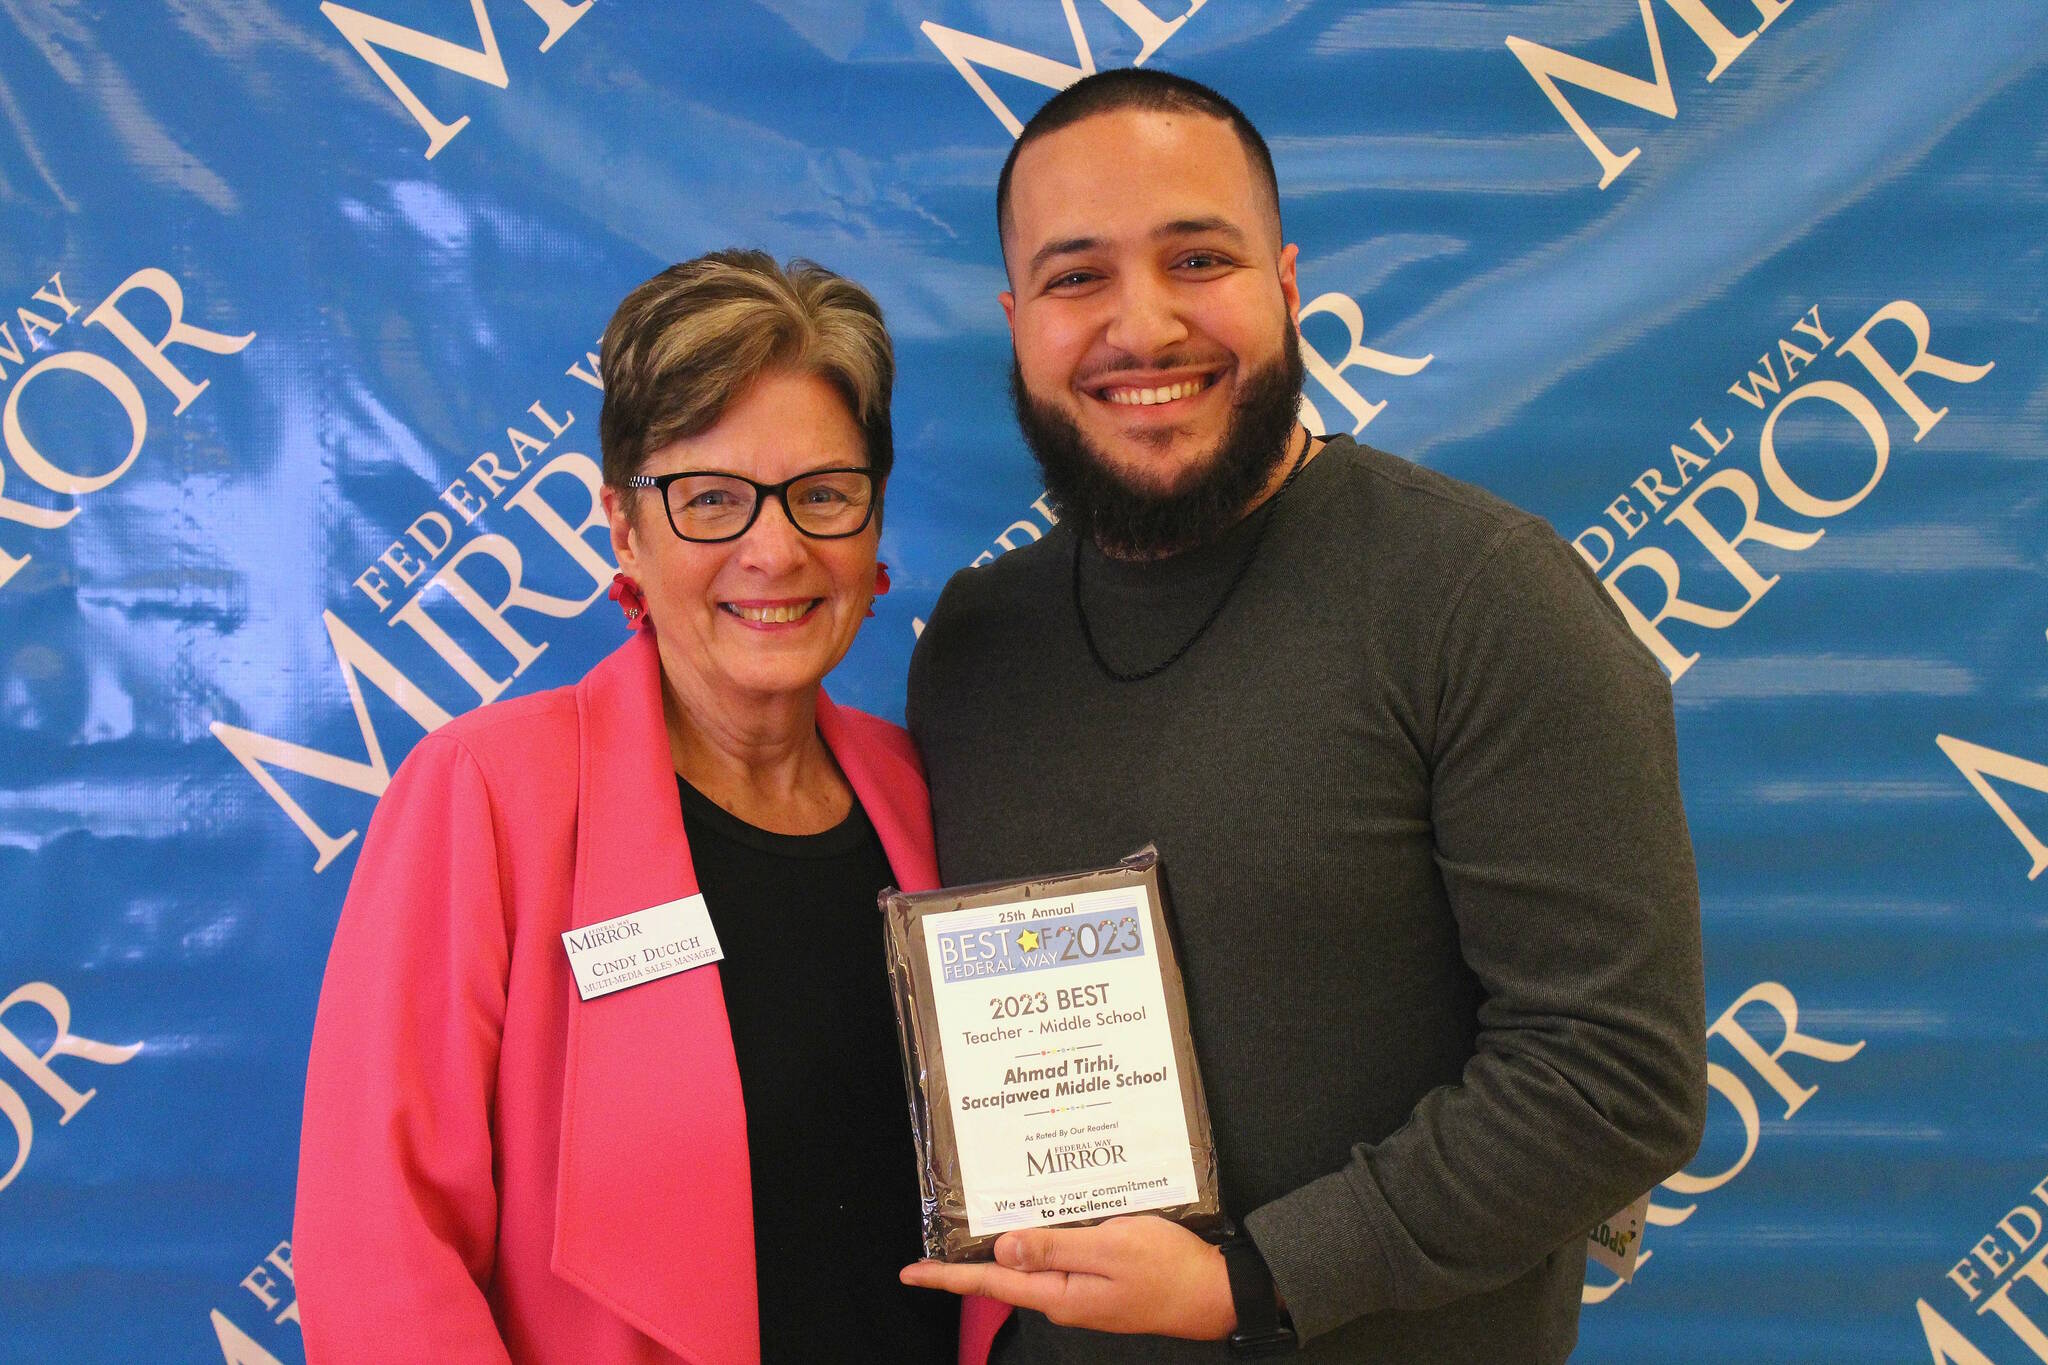 Federal Way Mirror Multi-Media Sales Manager Cindy Ducich stands with the Best Teacher - Middle School winner, Ahmad Tirhi of Sacajawea Middle School. Alex Bruell / The Mirror